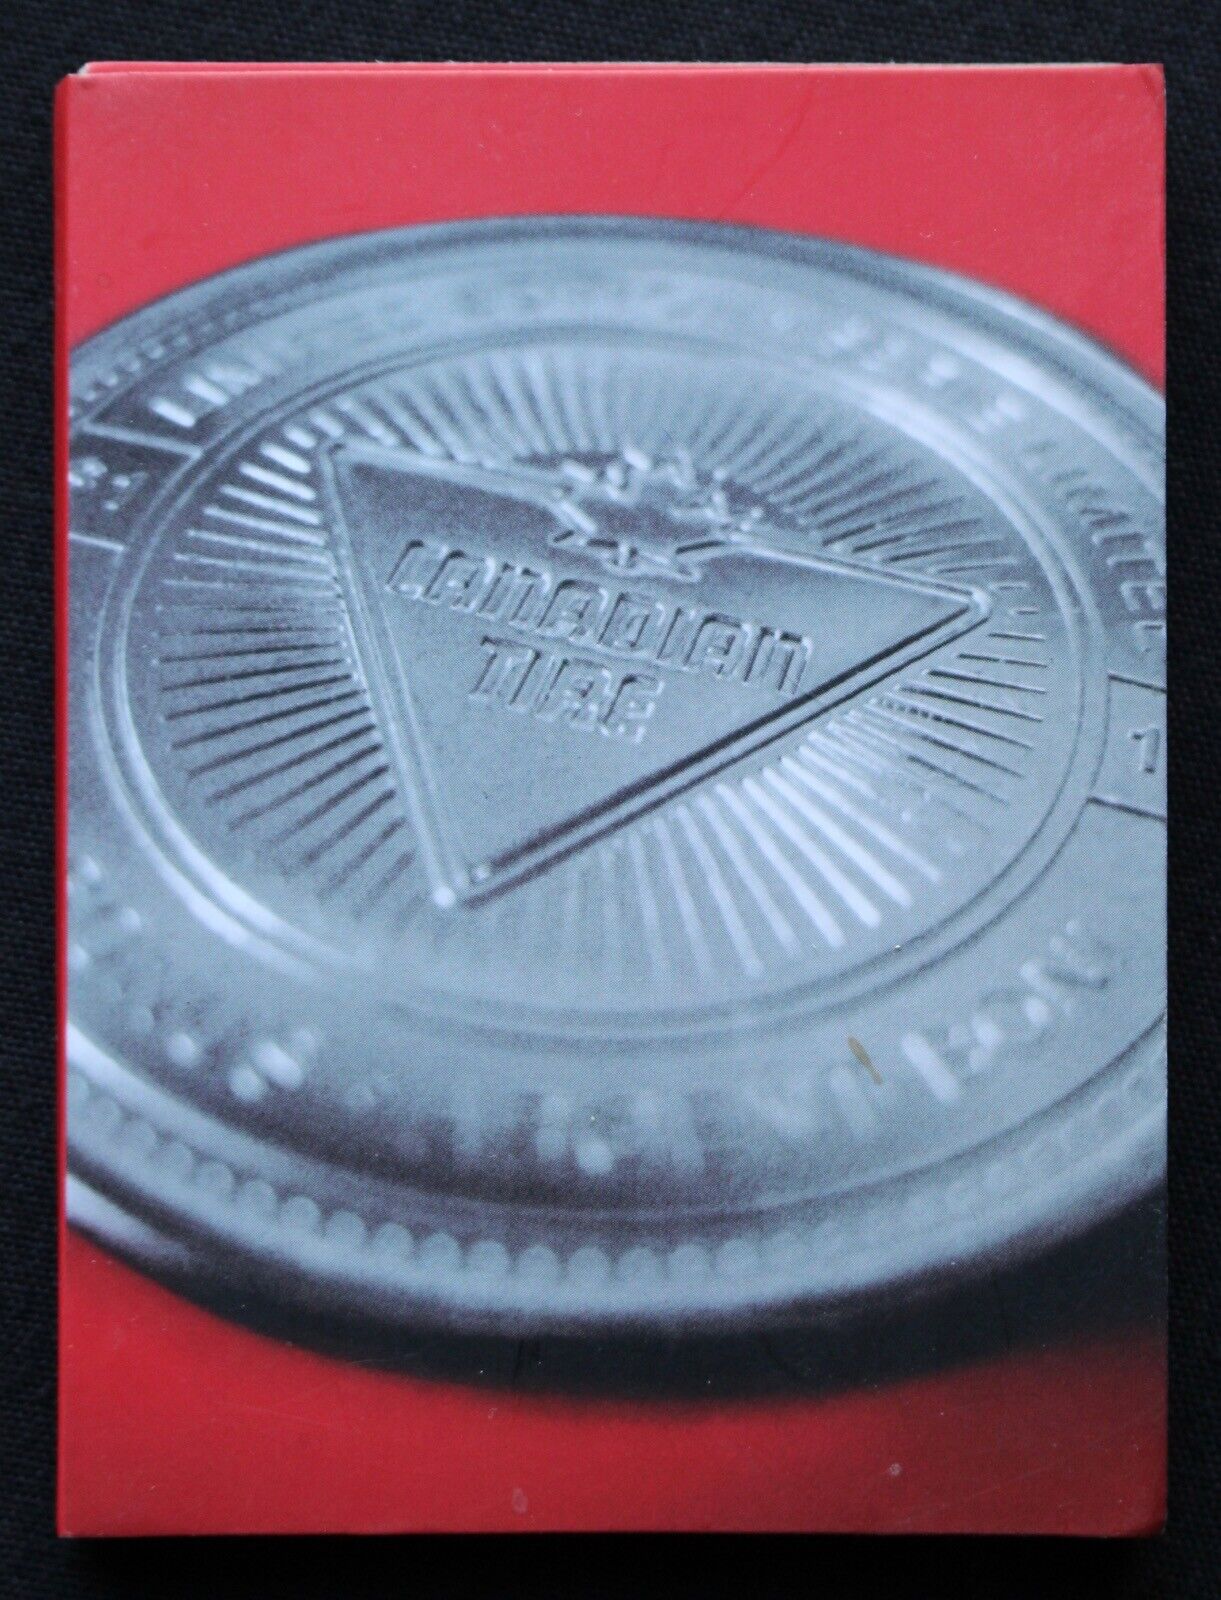 COLLECTIBLE CANADIAN TIRE 2010 LIMITED EDITION TOKEN HOLDER 